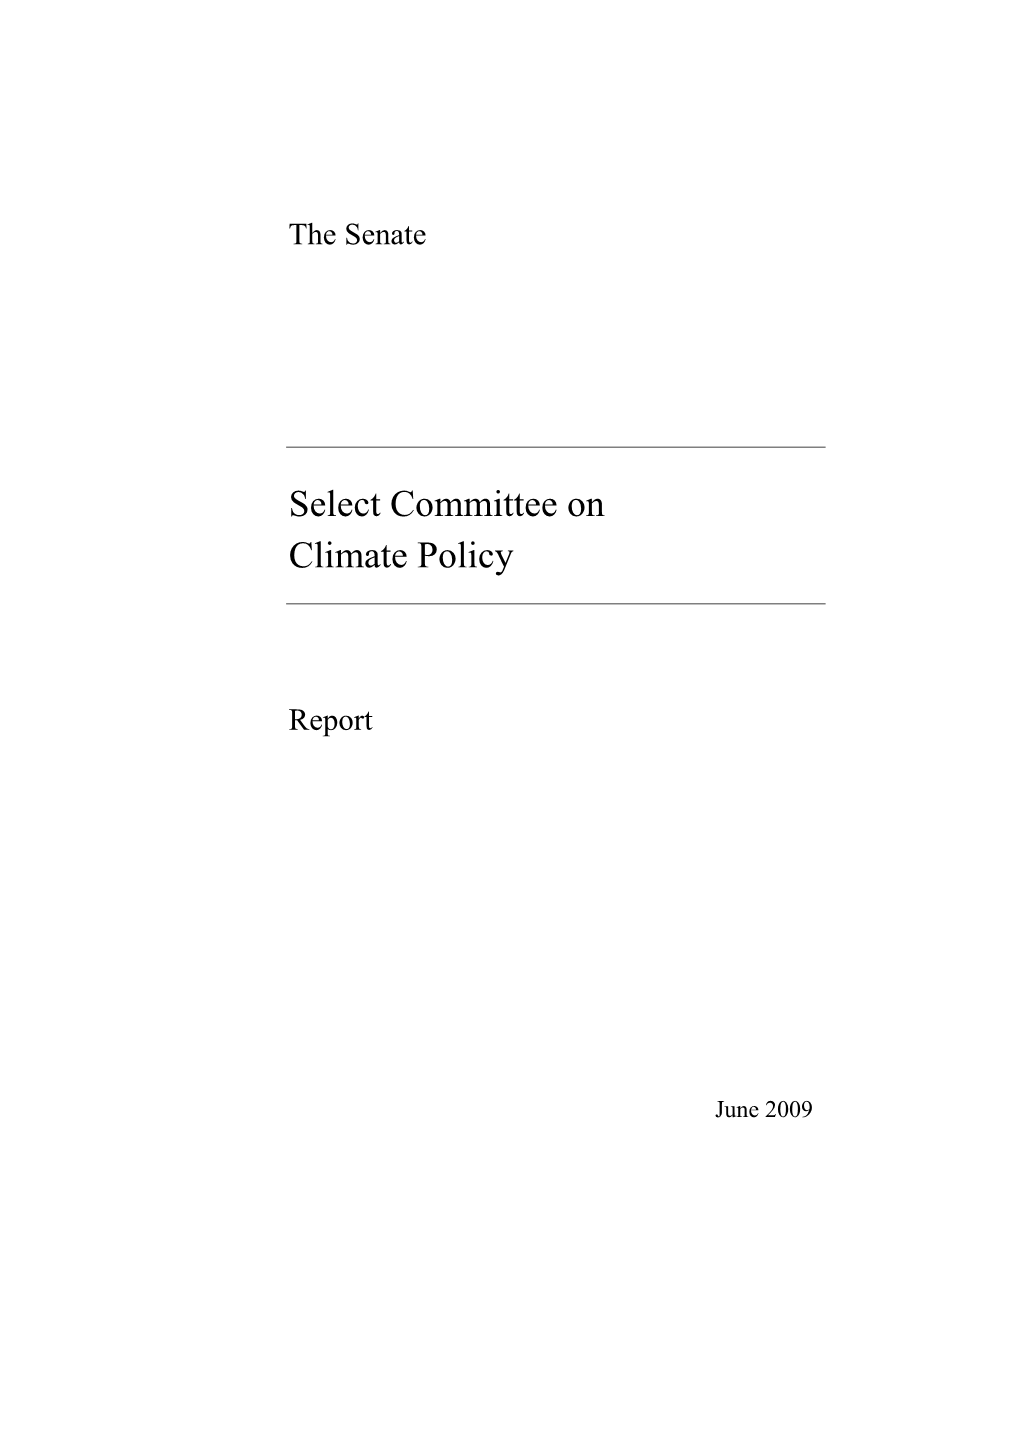 Senate Select Committee on Climate Policy